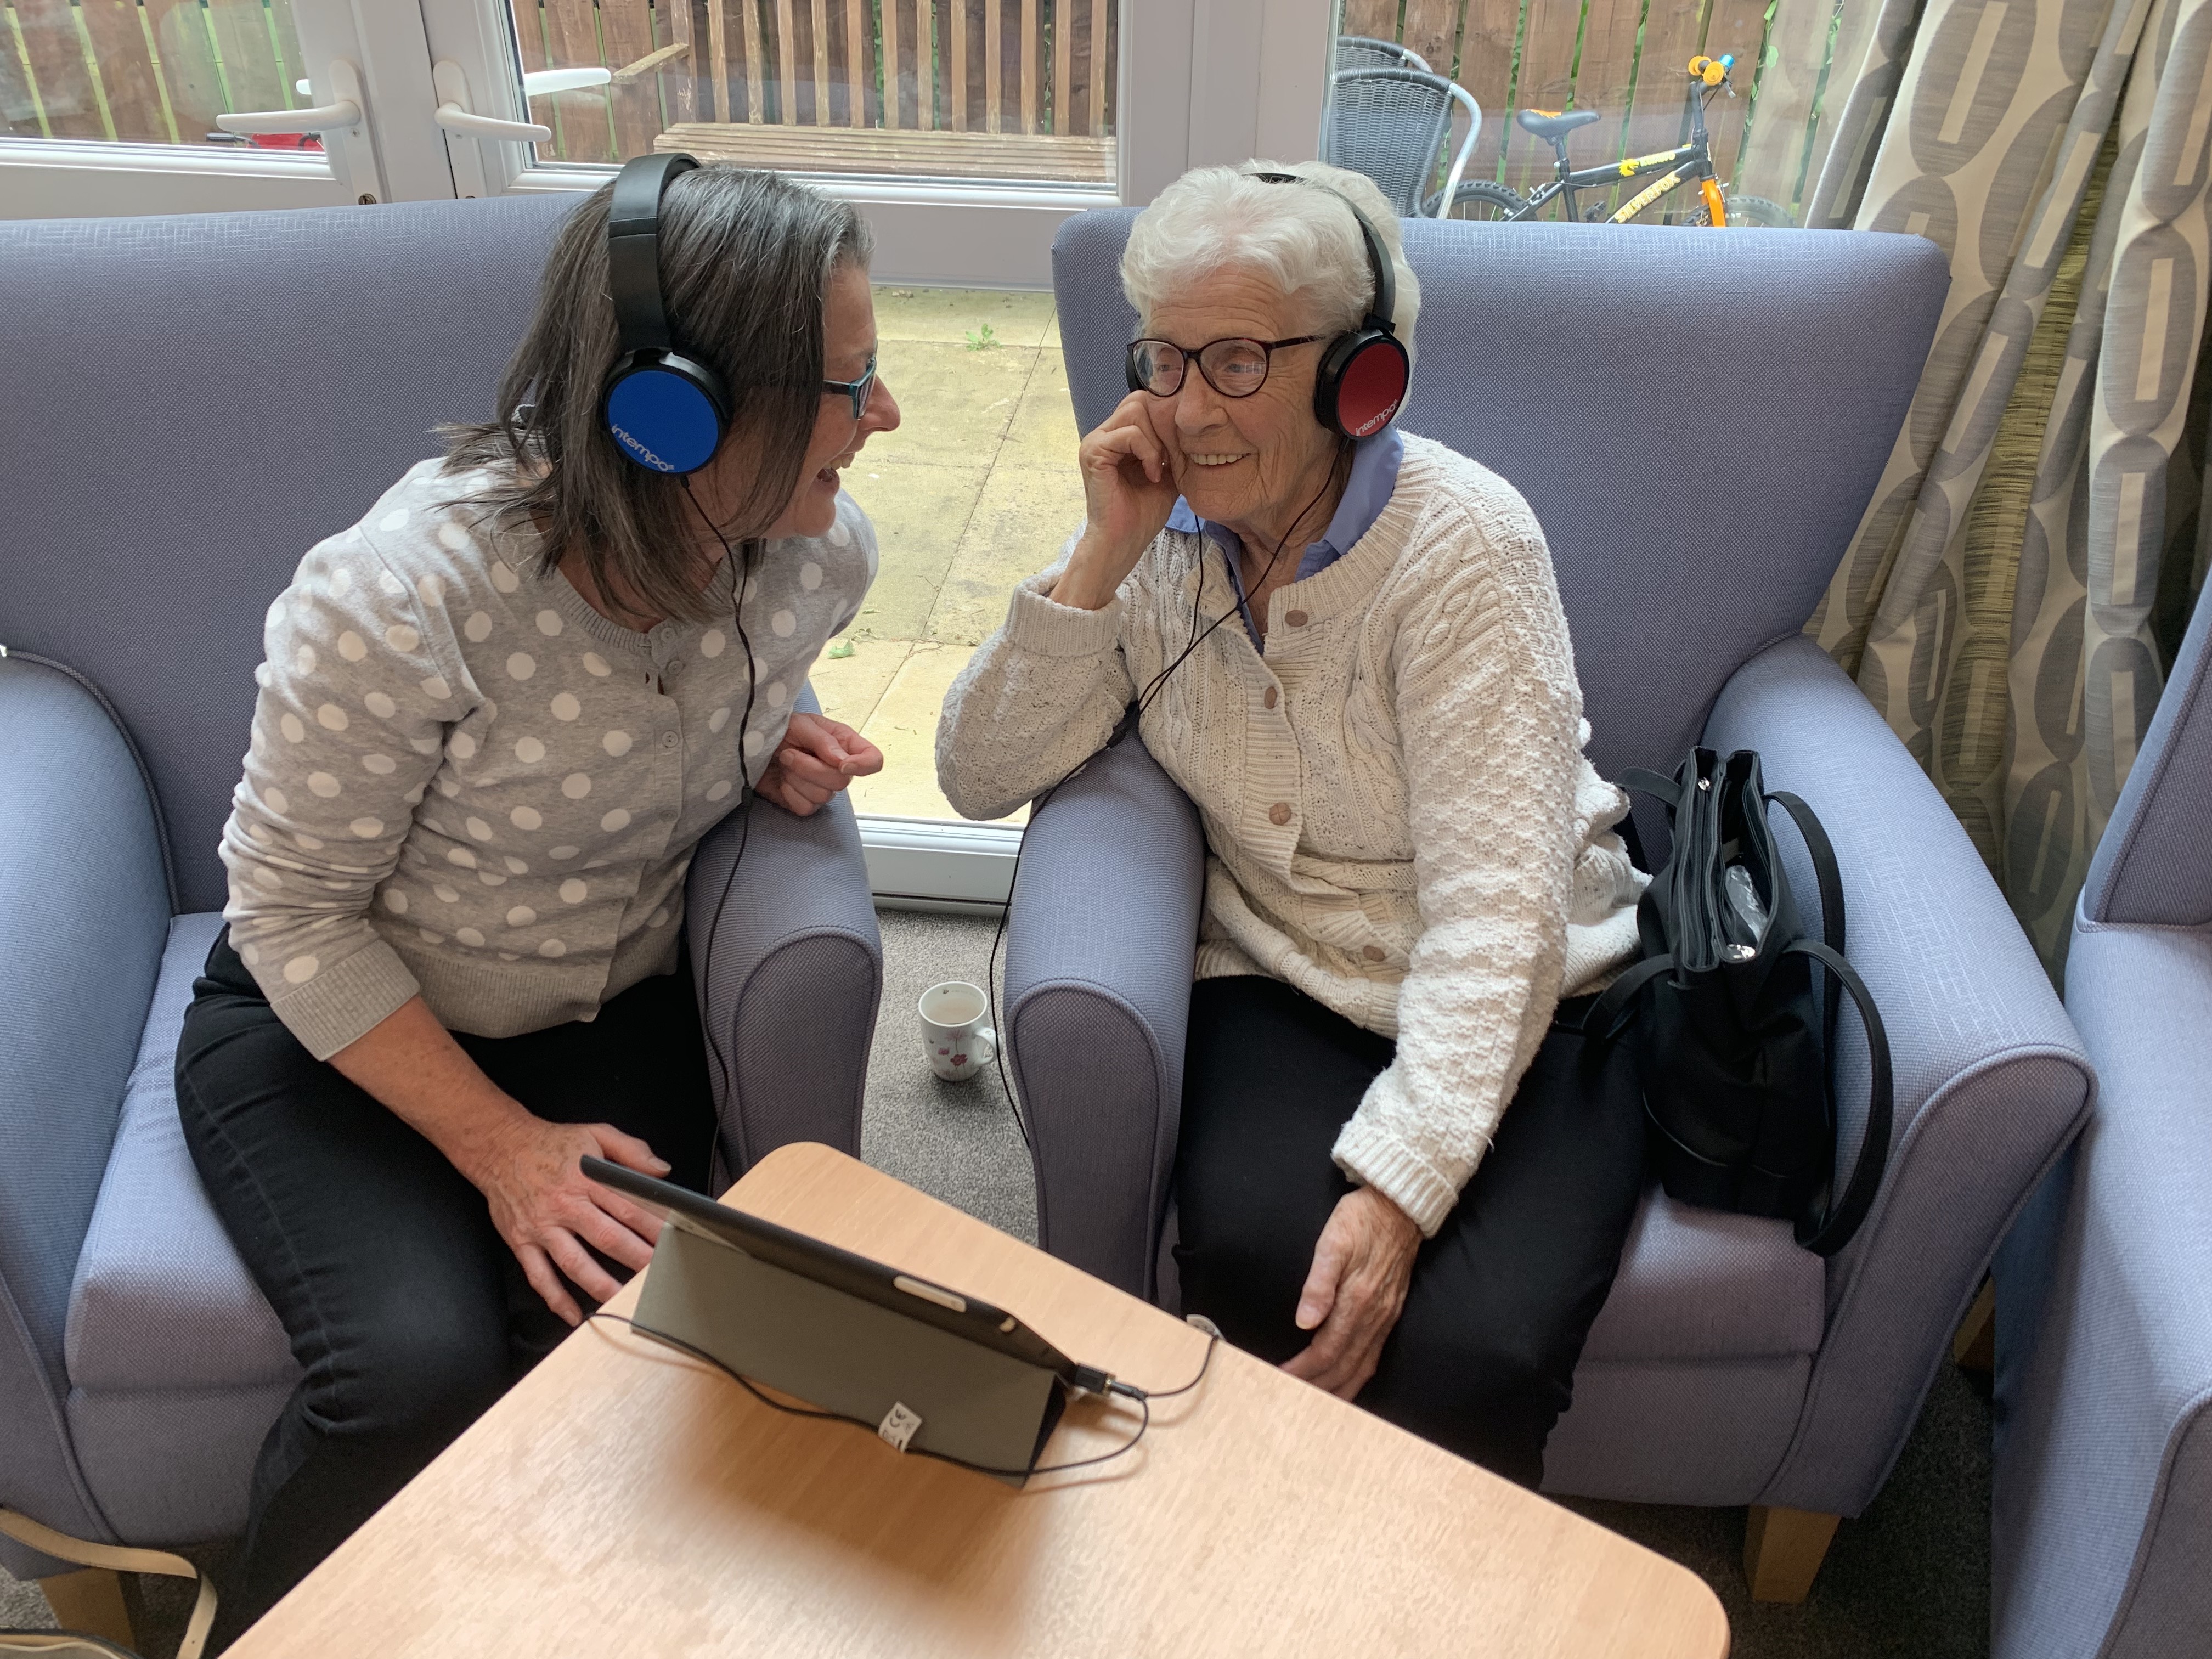 A young person and an older person both wearing headphone connected to a laptop. They are laughing.